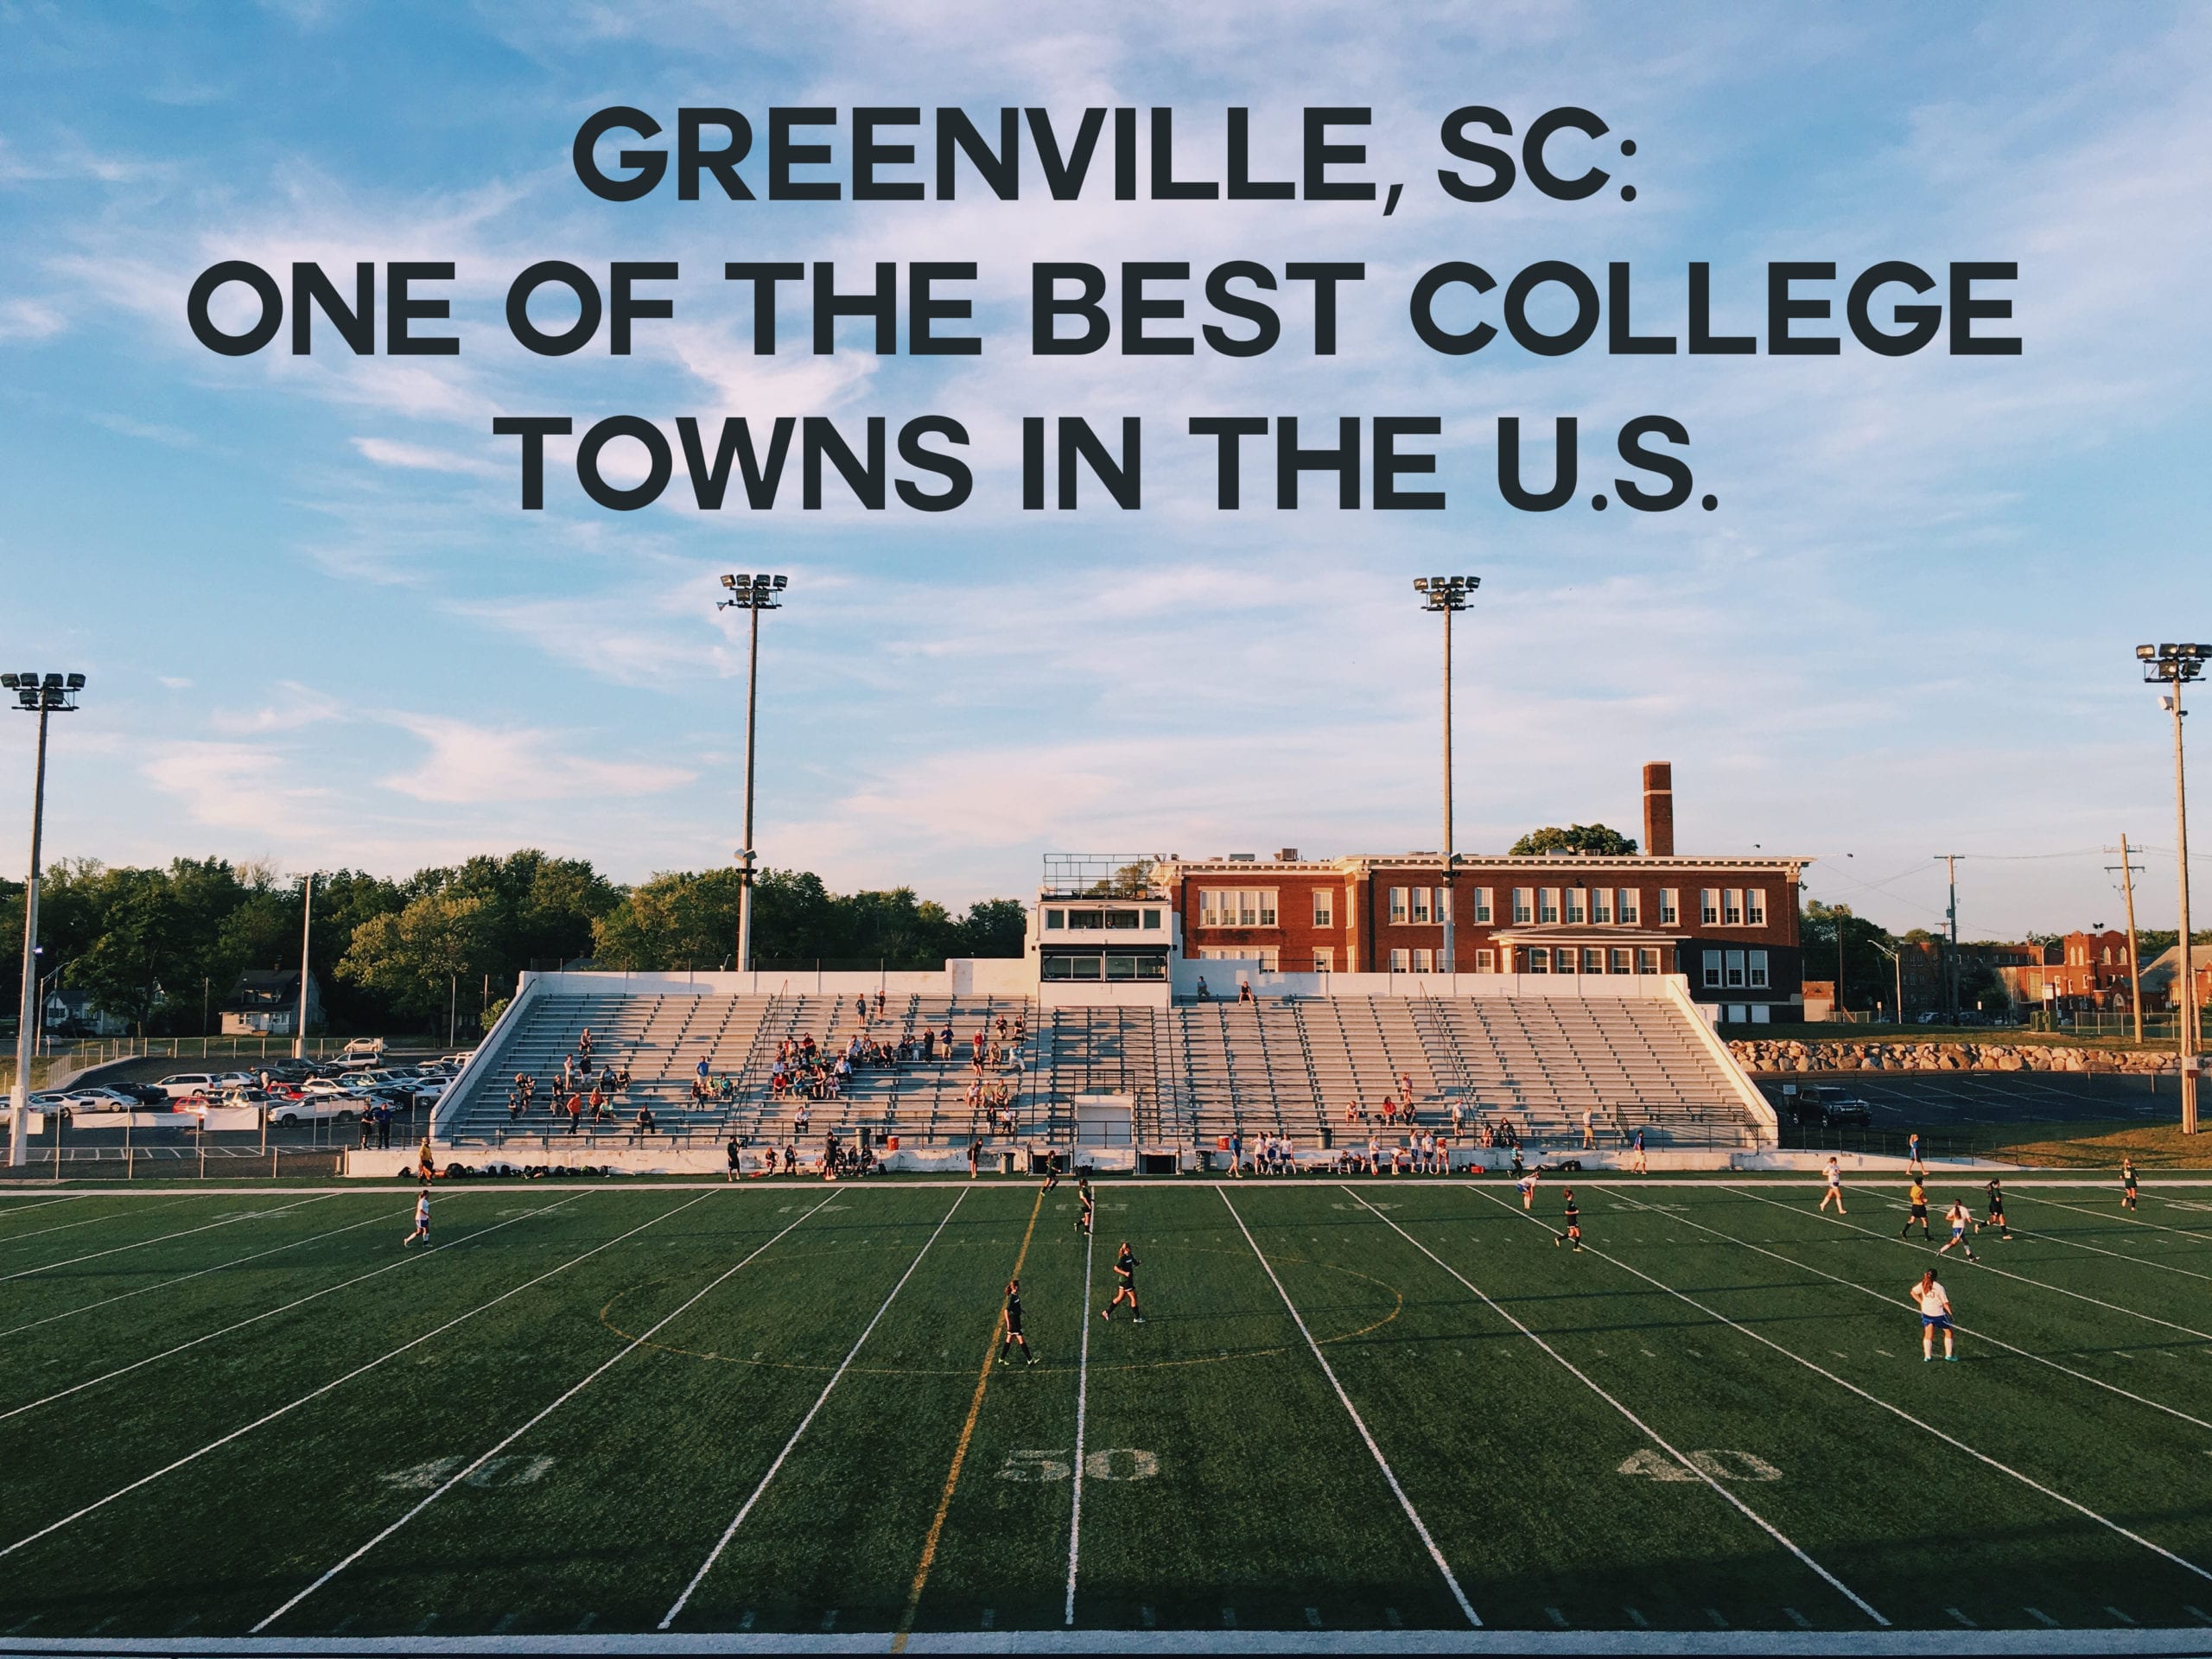 Back to School: Greenville Makes Top College Town